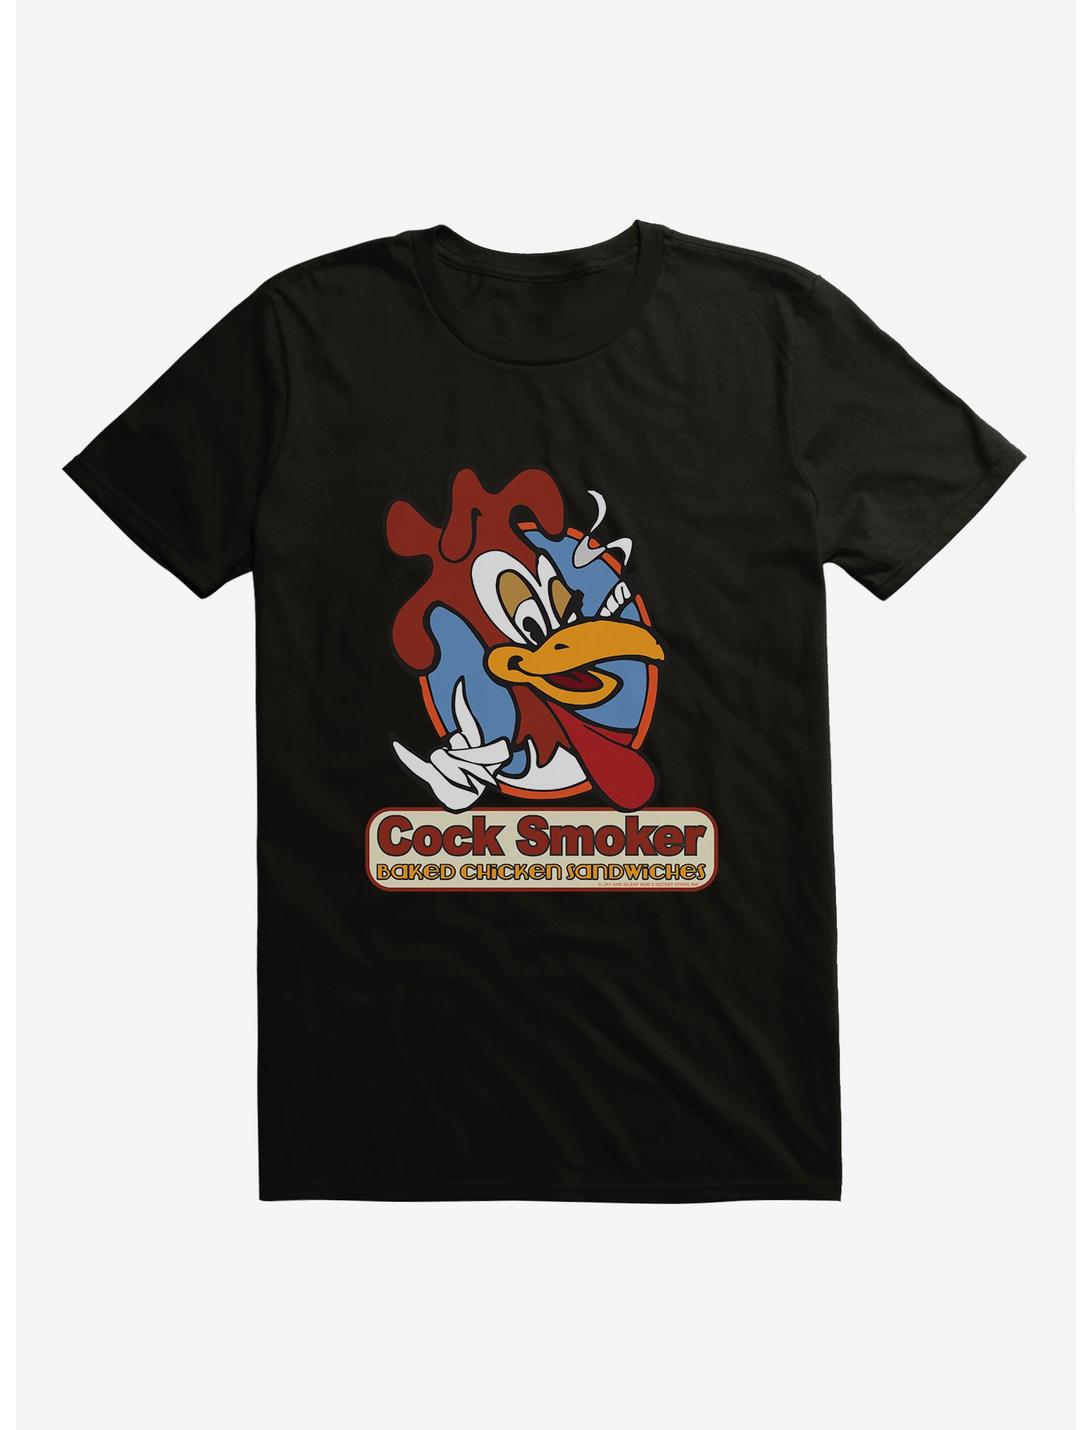 Jay and Silent Bob Reboot Cock Smoker Baked Chicken Sandwiches T-Shirt, BLACK, hi-res